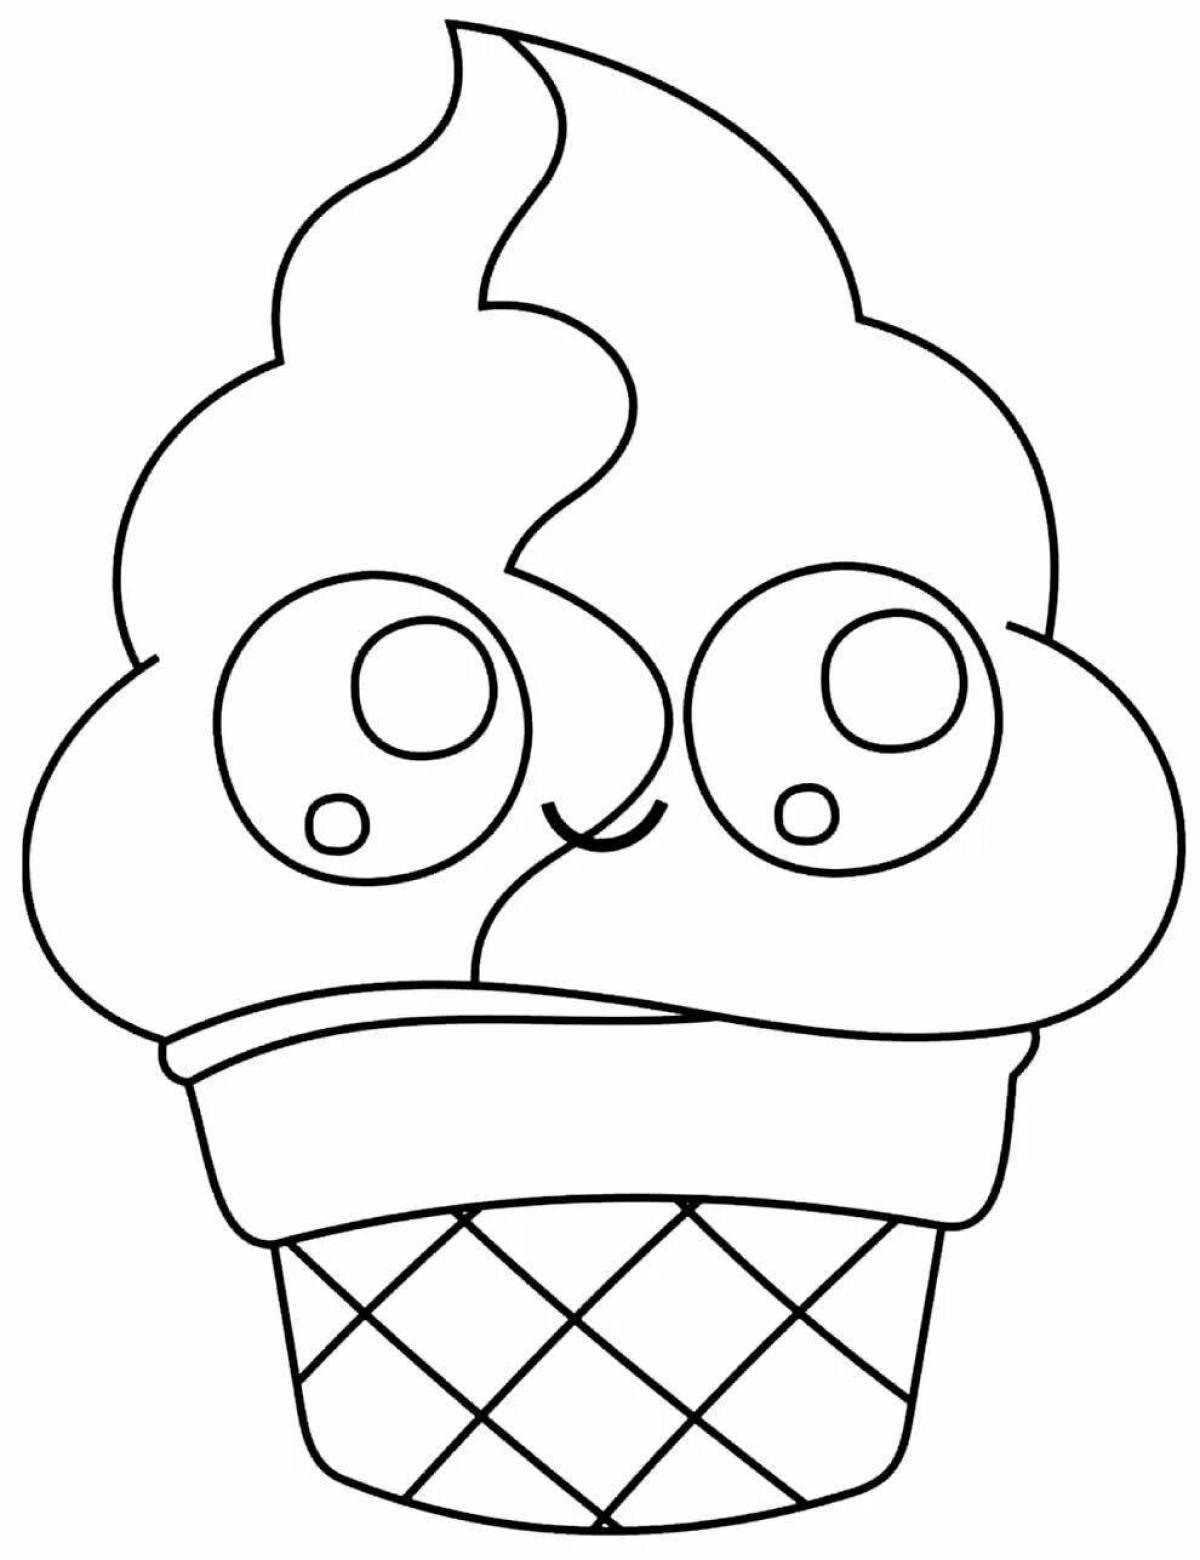 Delightful squishy food coloring page